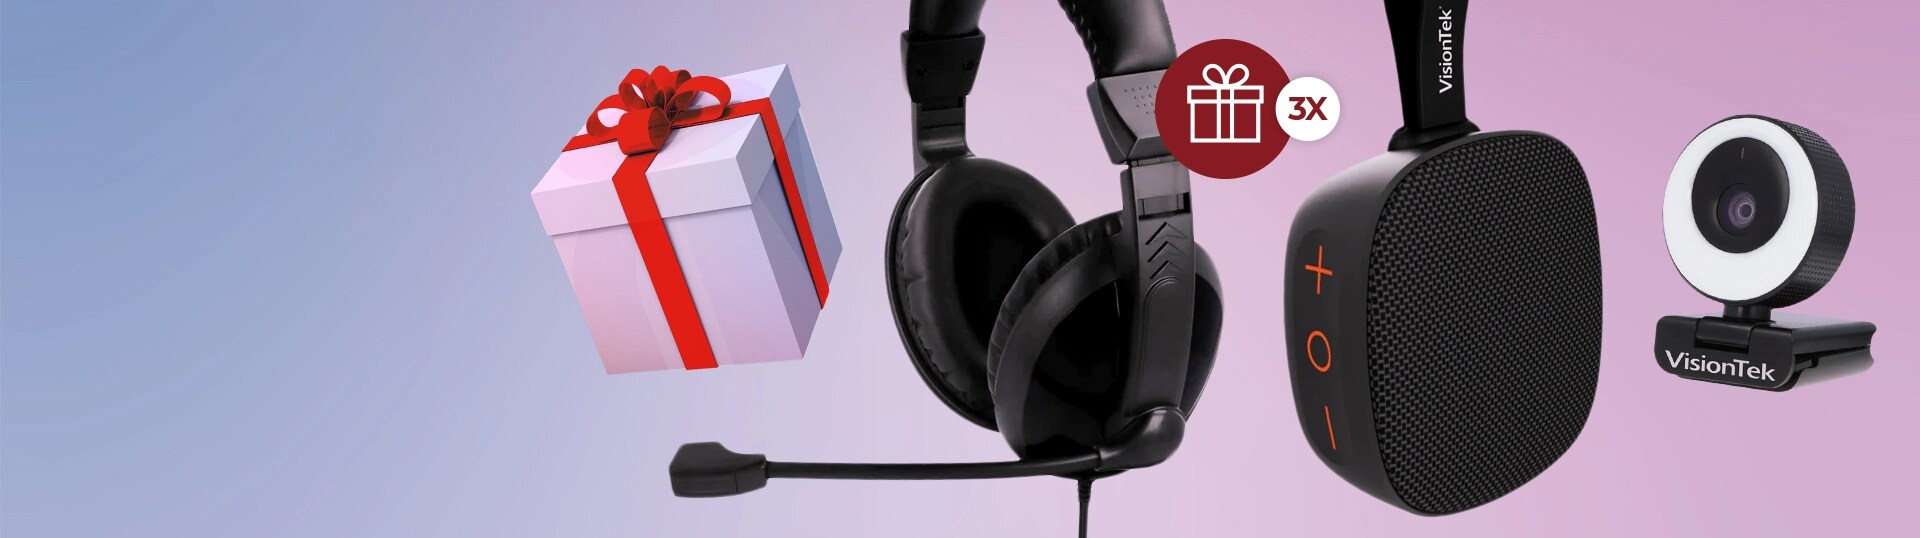 A My Lenovo Rewards giftbox and 3X icon with a VisionTek headset, speaker and webcam